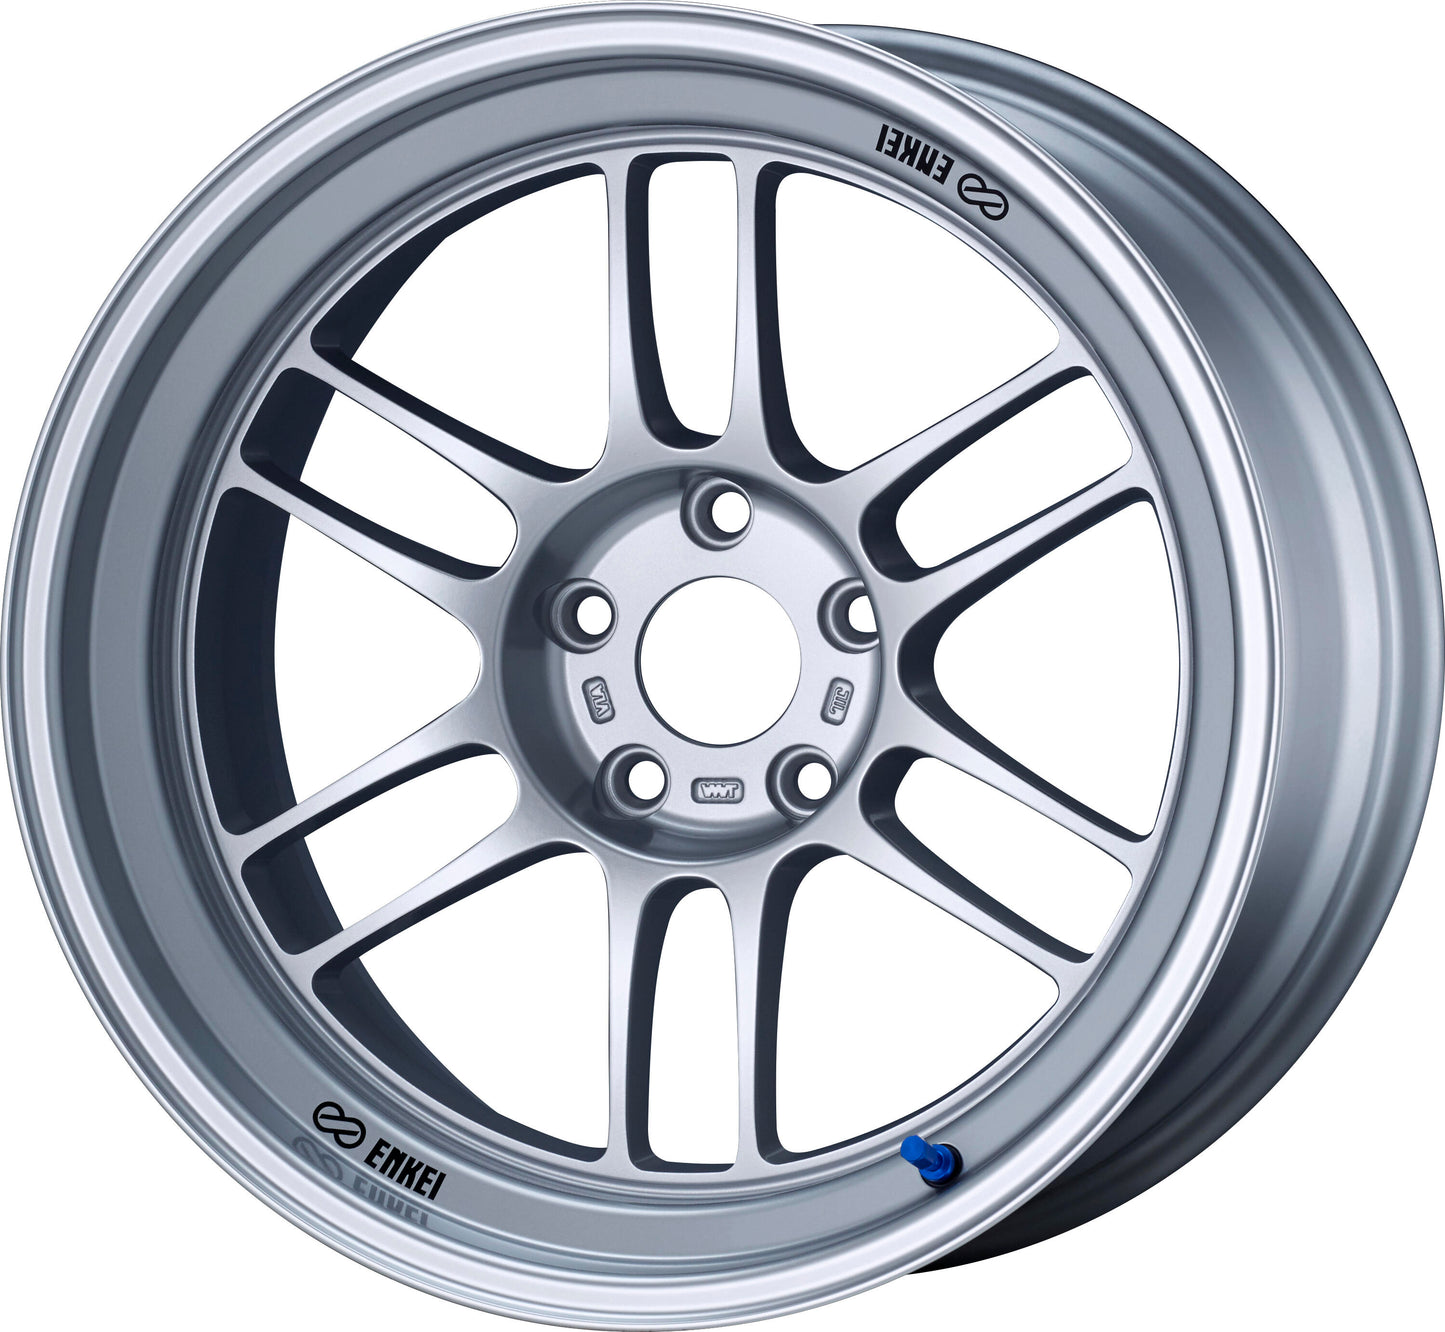 ENKEI RPF1 RS SILVER 18x9.5 +12 5-114.3 ***PRE-ORDER ARRIVAL END OF FEBRUARY***